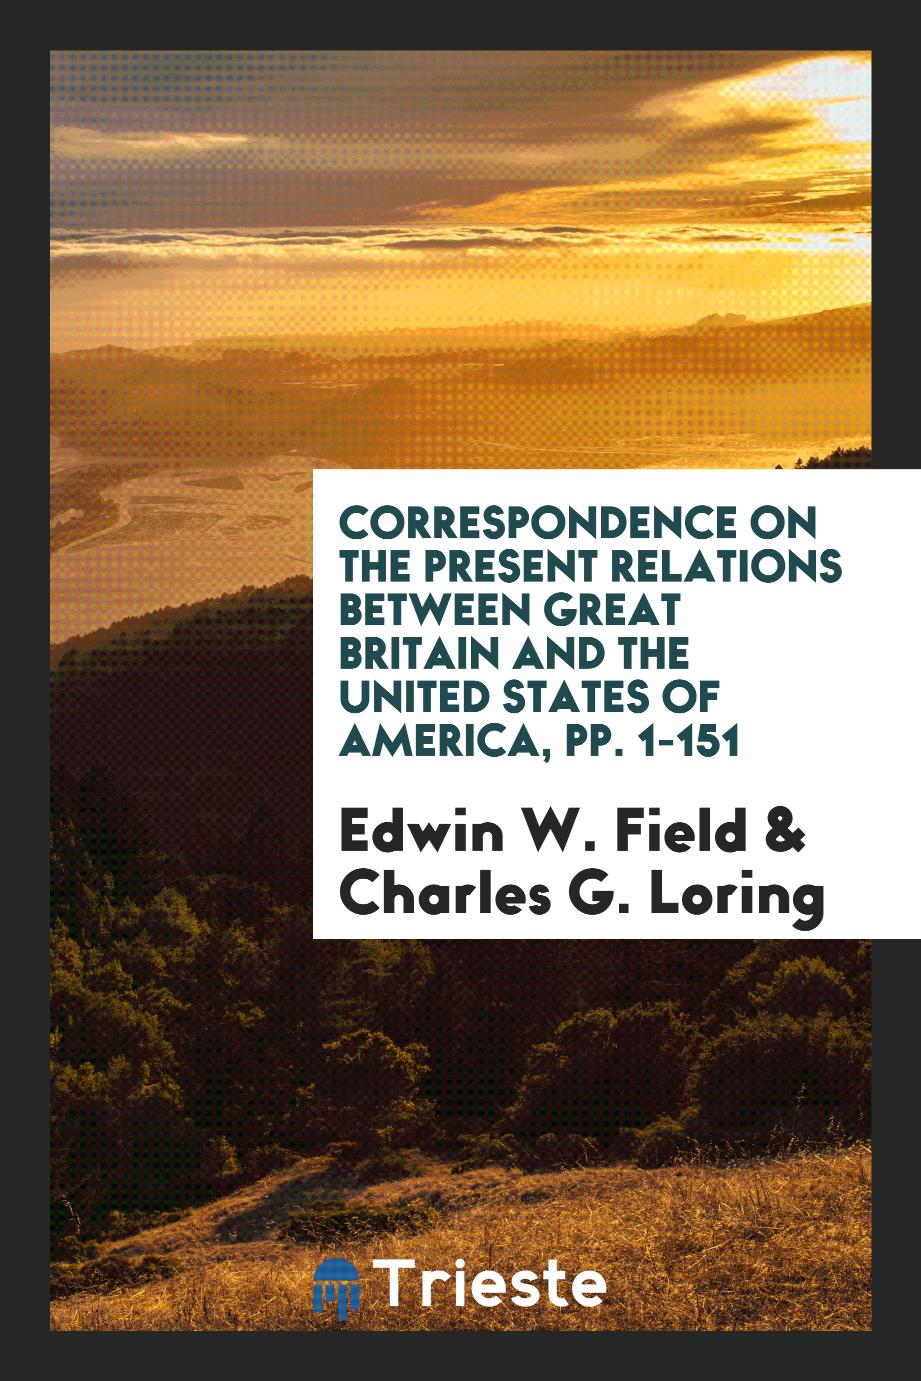 Correspondence on the Present Relations between Great Britain and the United States of America, pp. 1-151